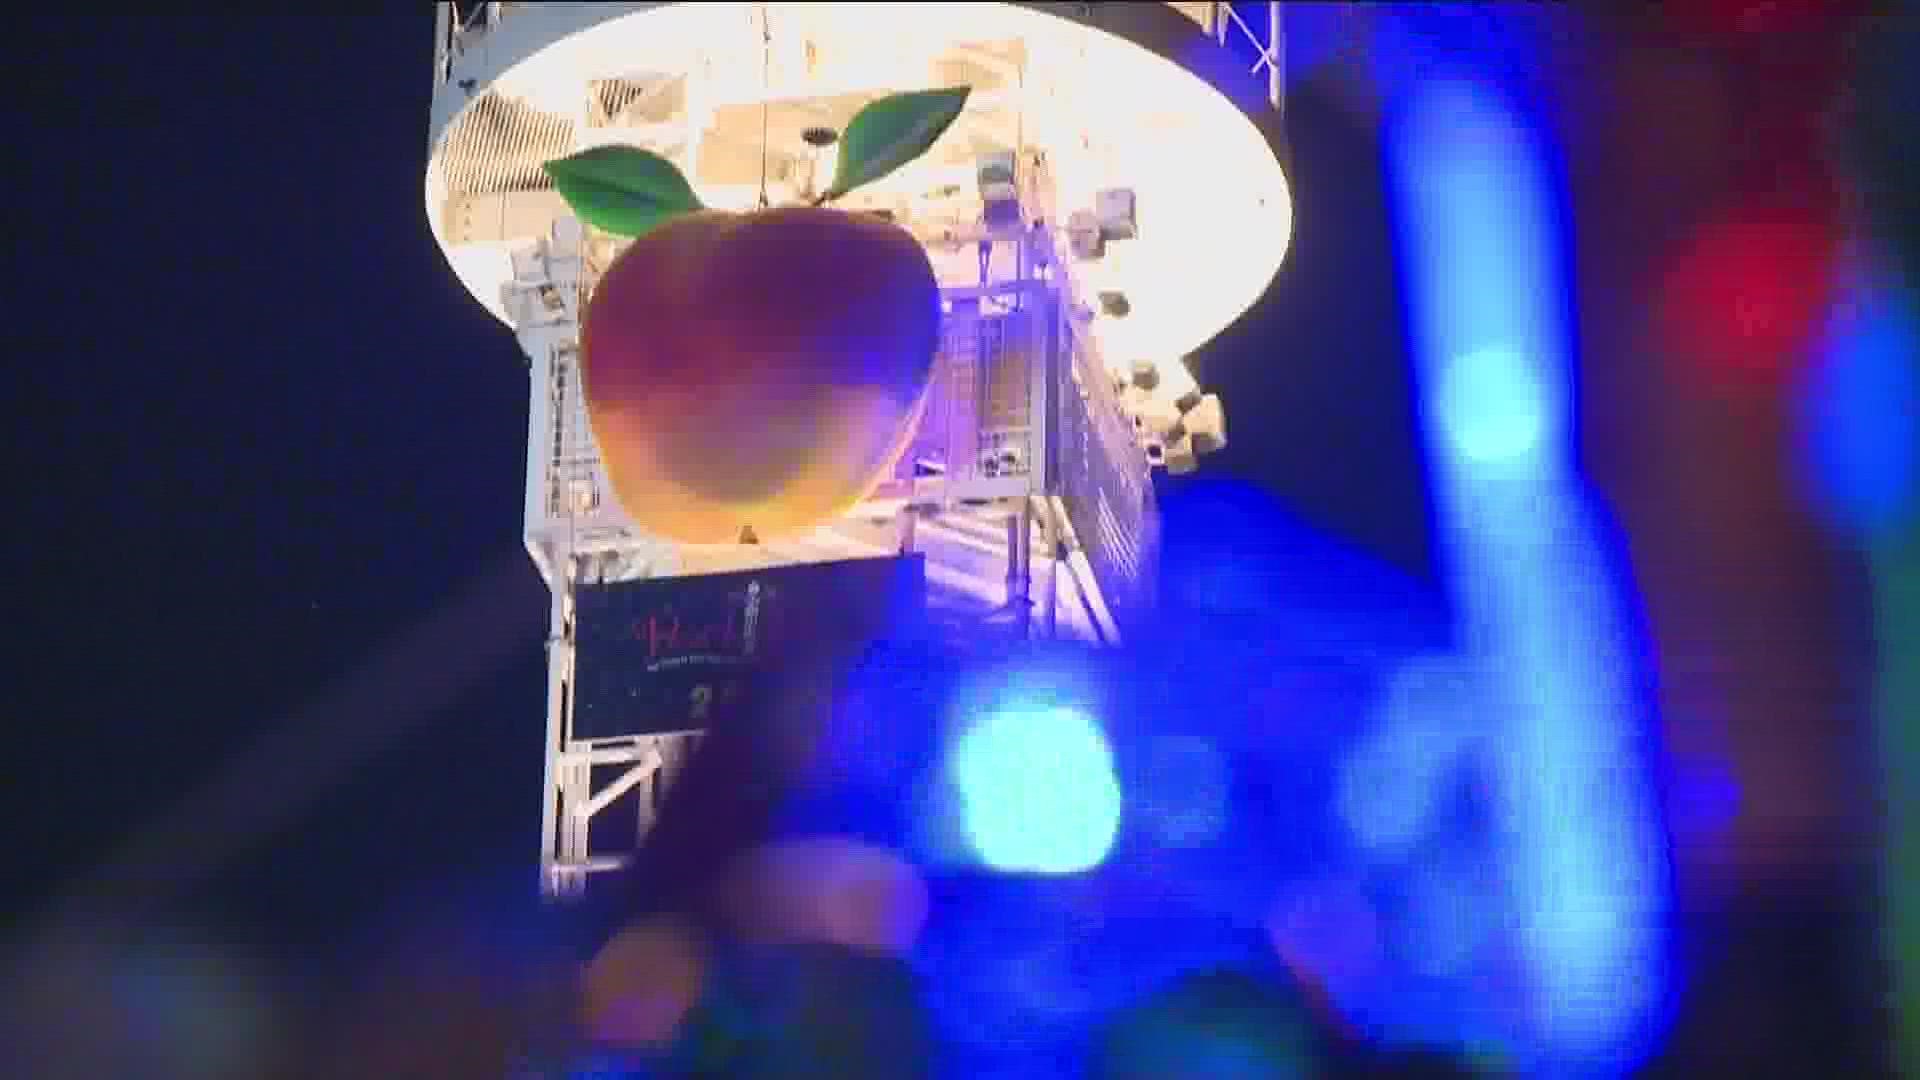 Now the Peach Drop is back, and Atlanta Police are expecting 50,000 to 60,000 people to attend.